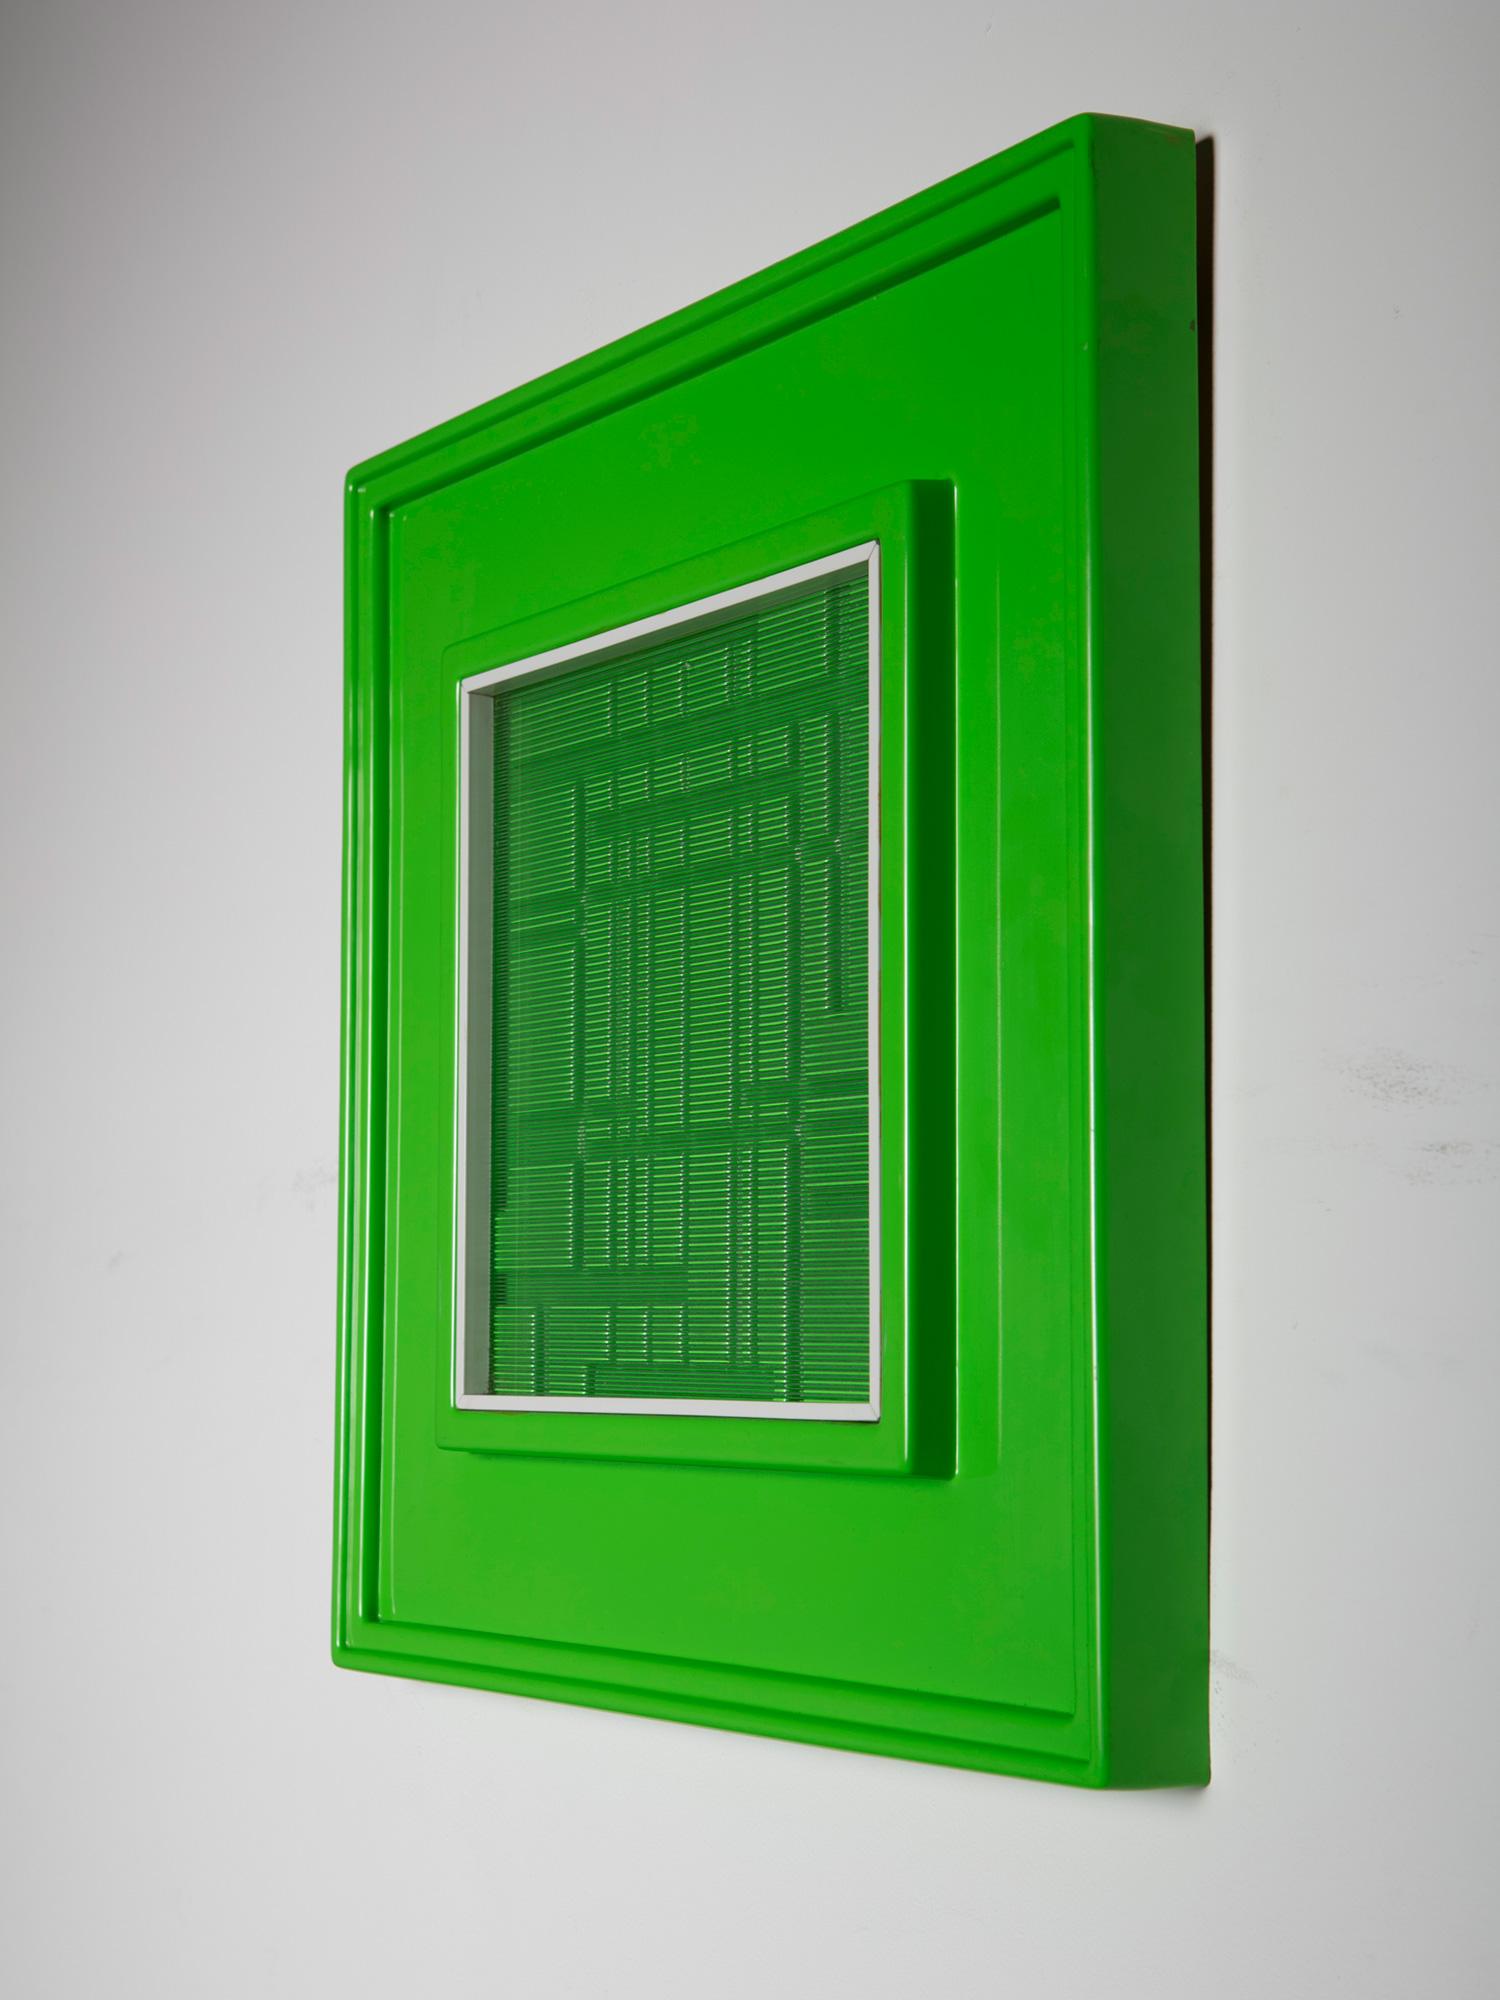 Intriguing work by Urano Palma.
Molded plastic shell, glass panel and lacquered wood frame. 
Part of a limited numbered edition of 500 specimens.